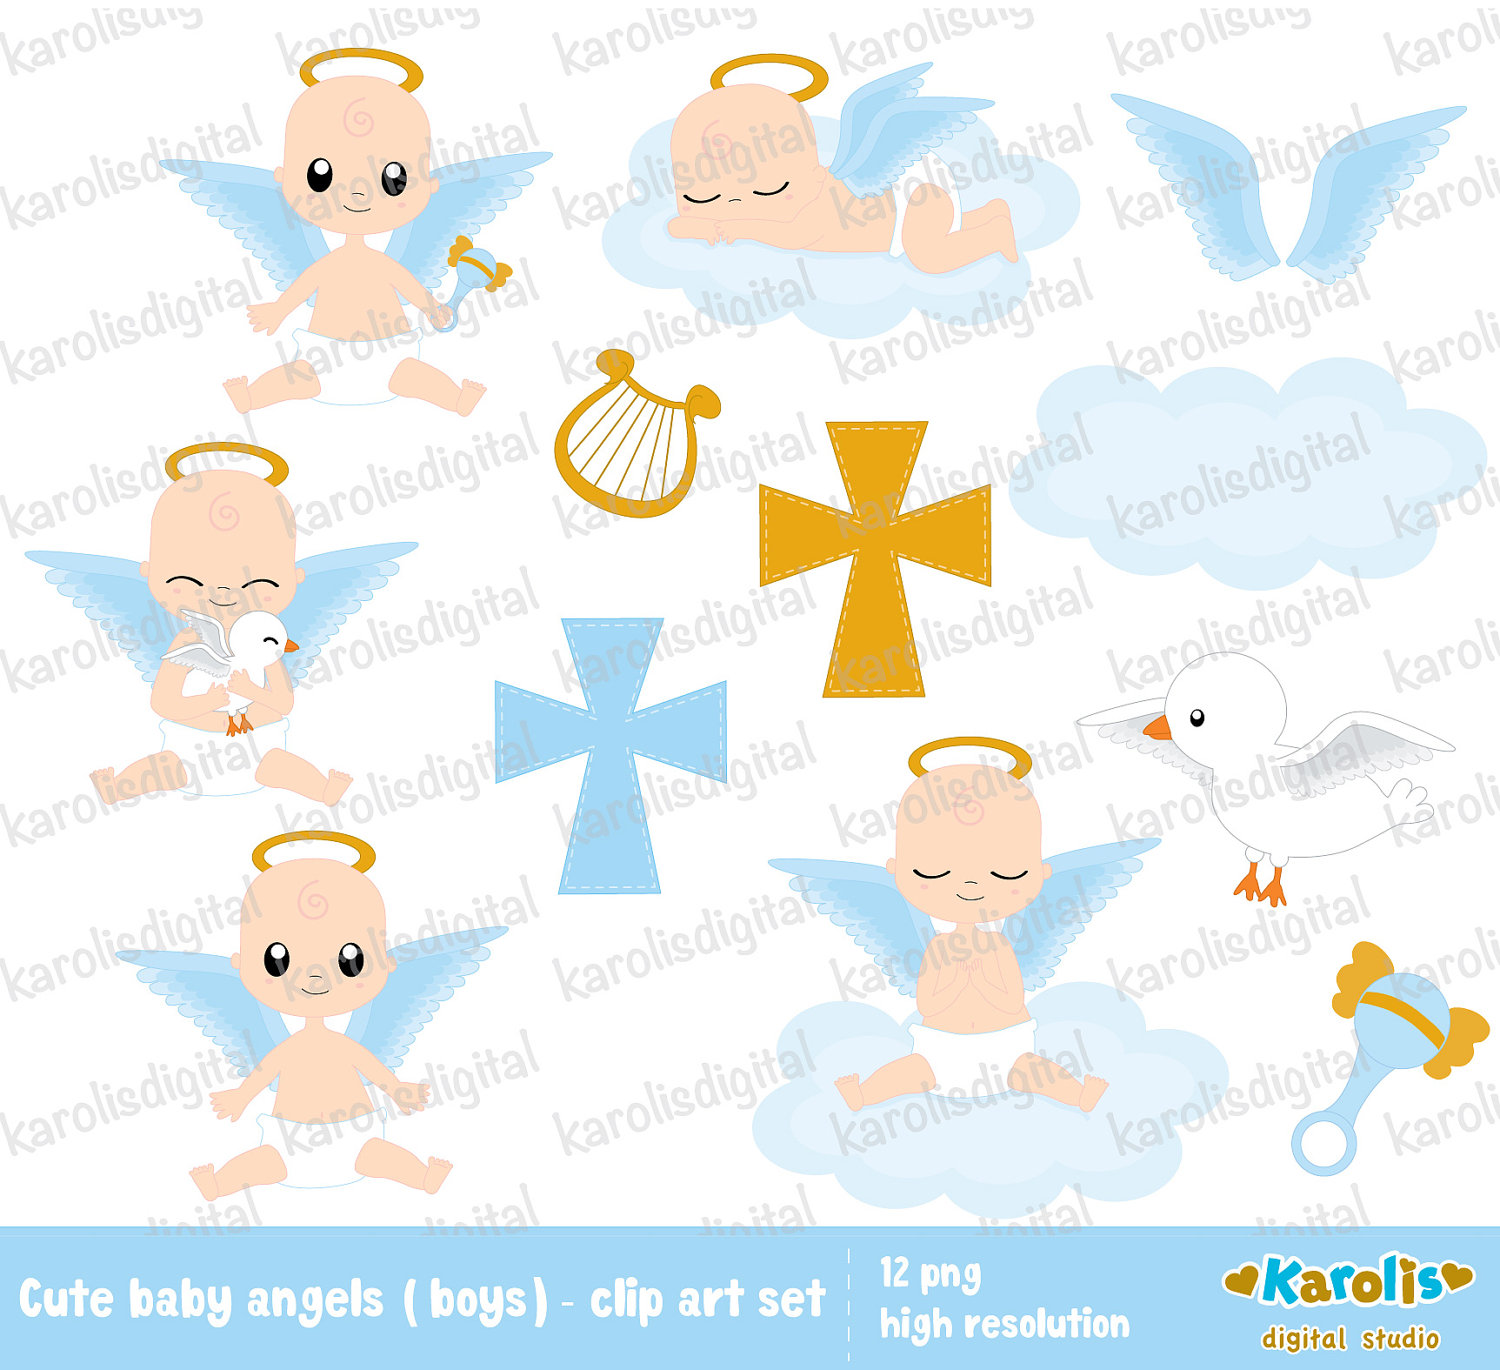 baby angel clipart